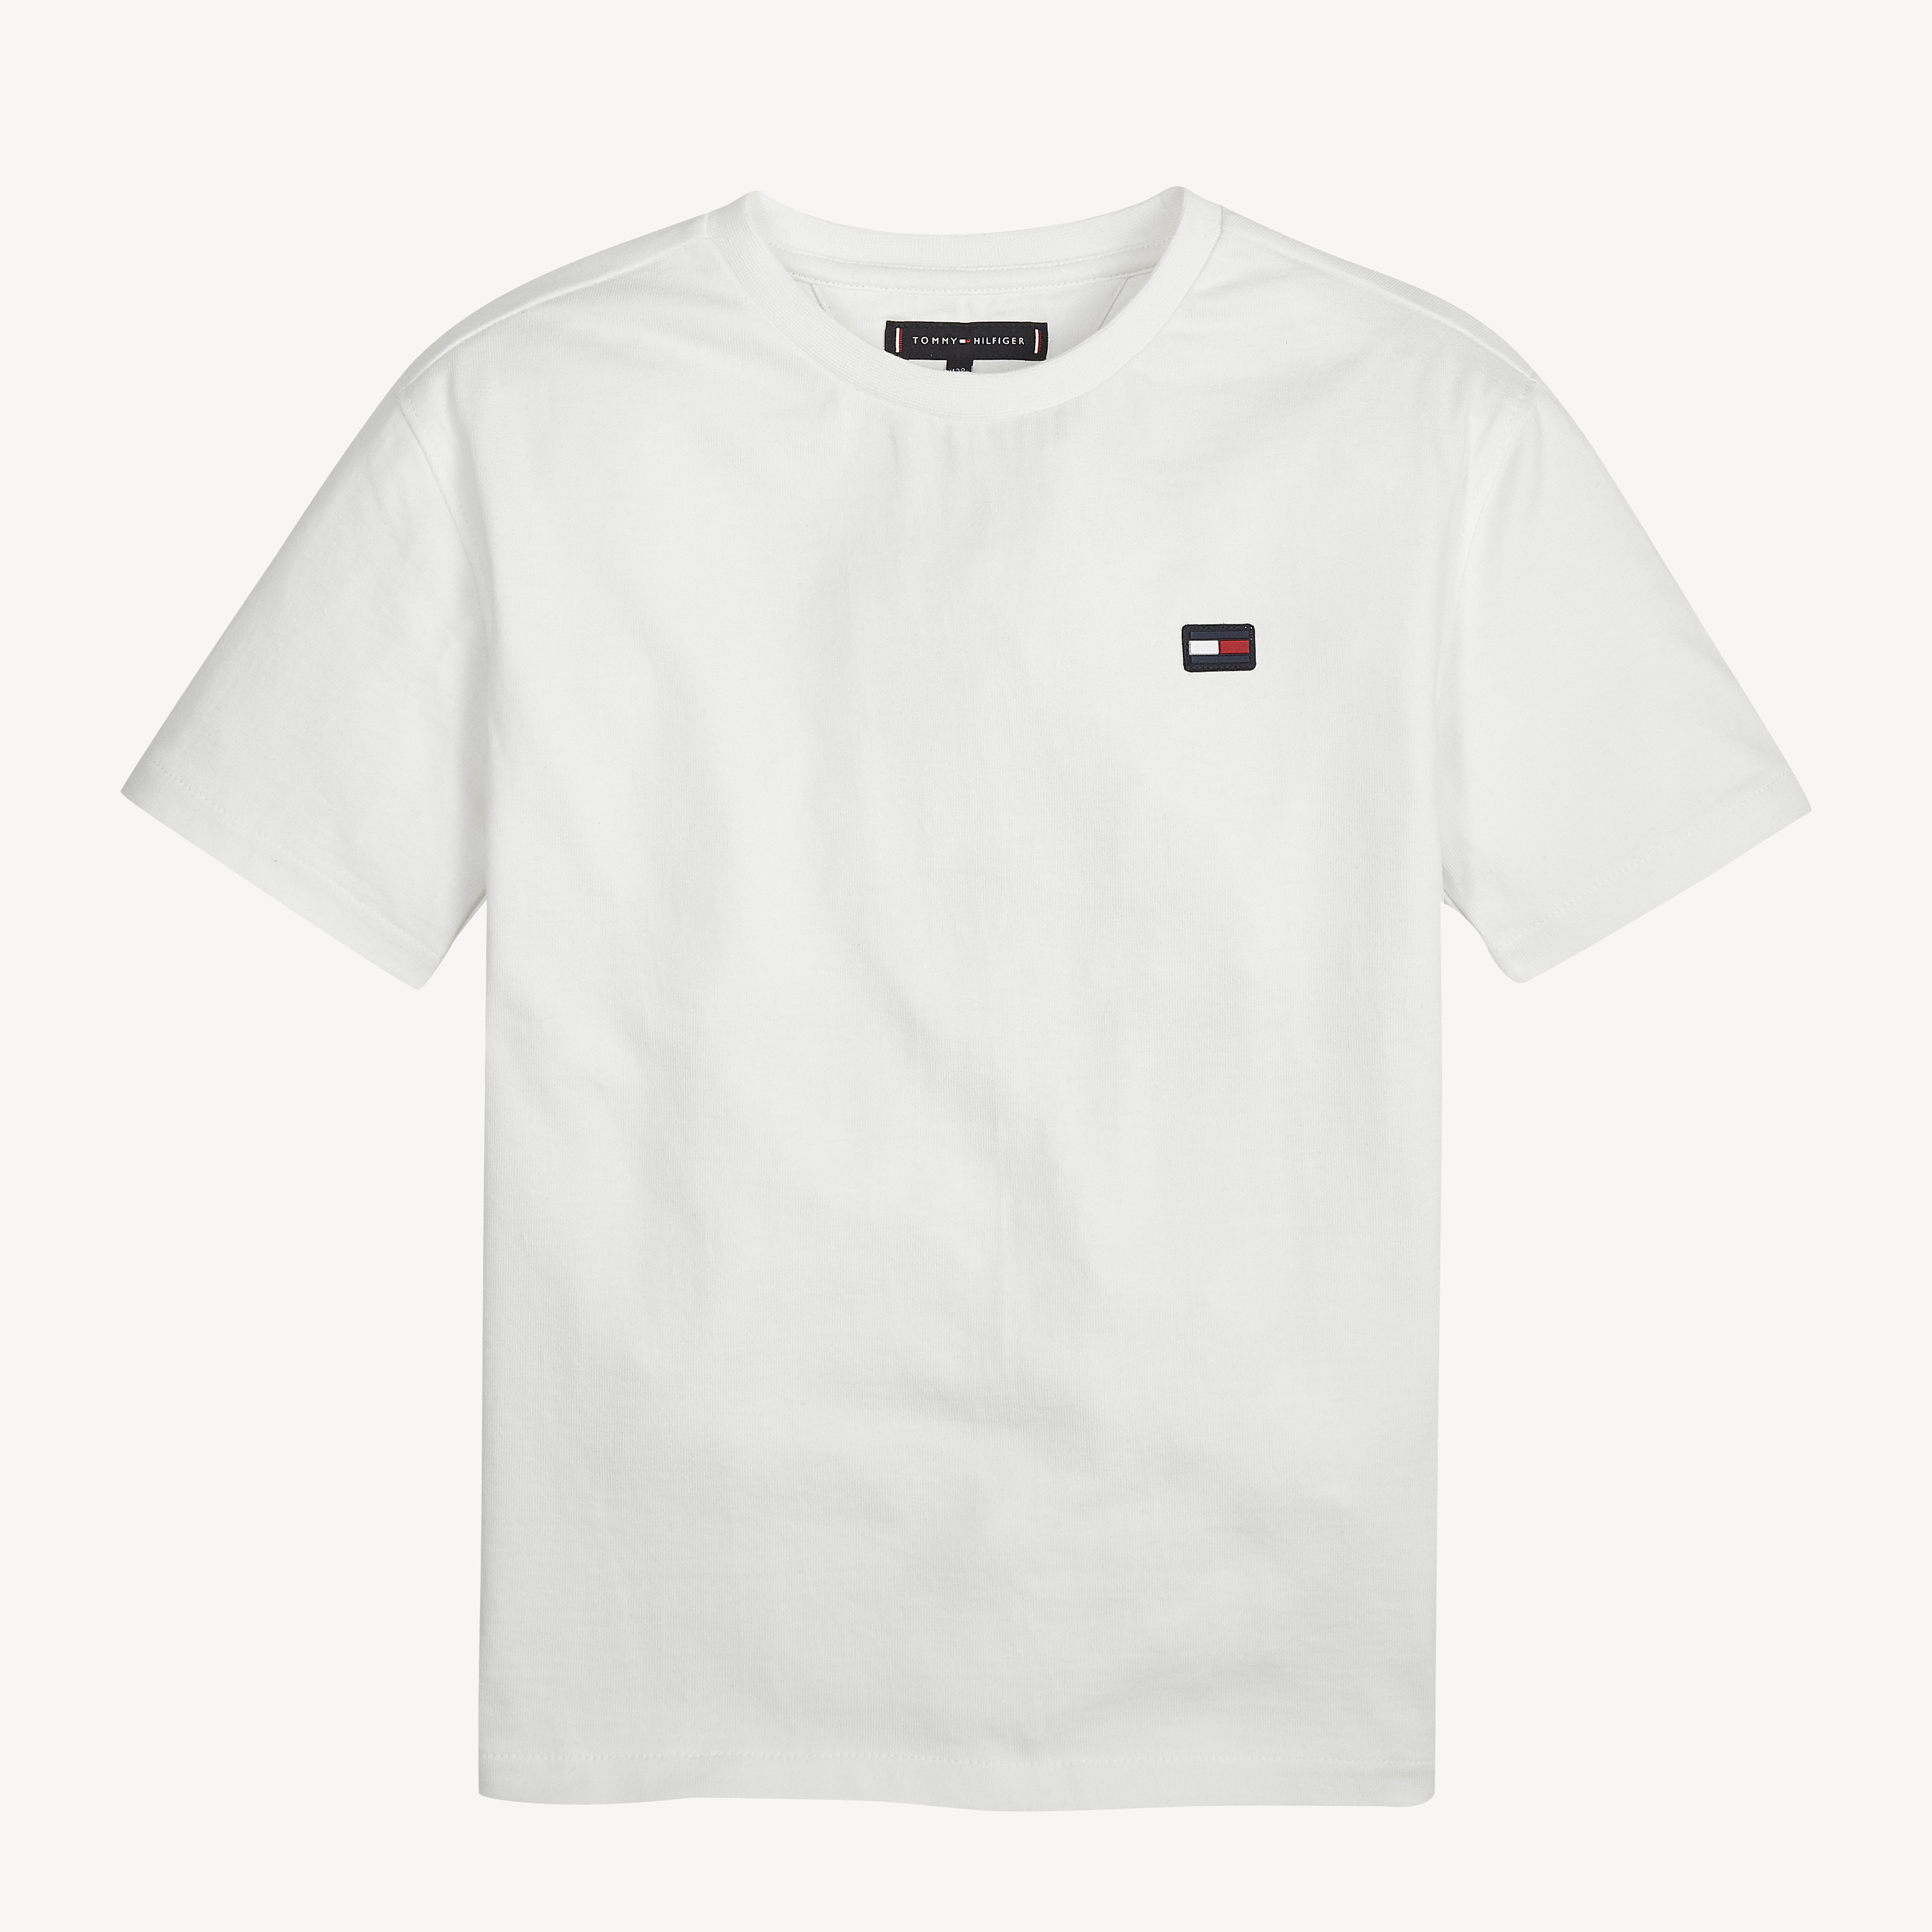 tommy hilfiger official online store